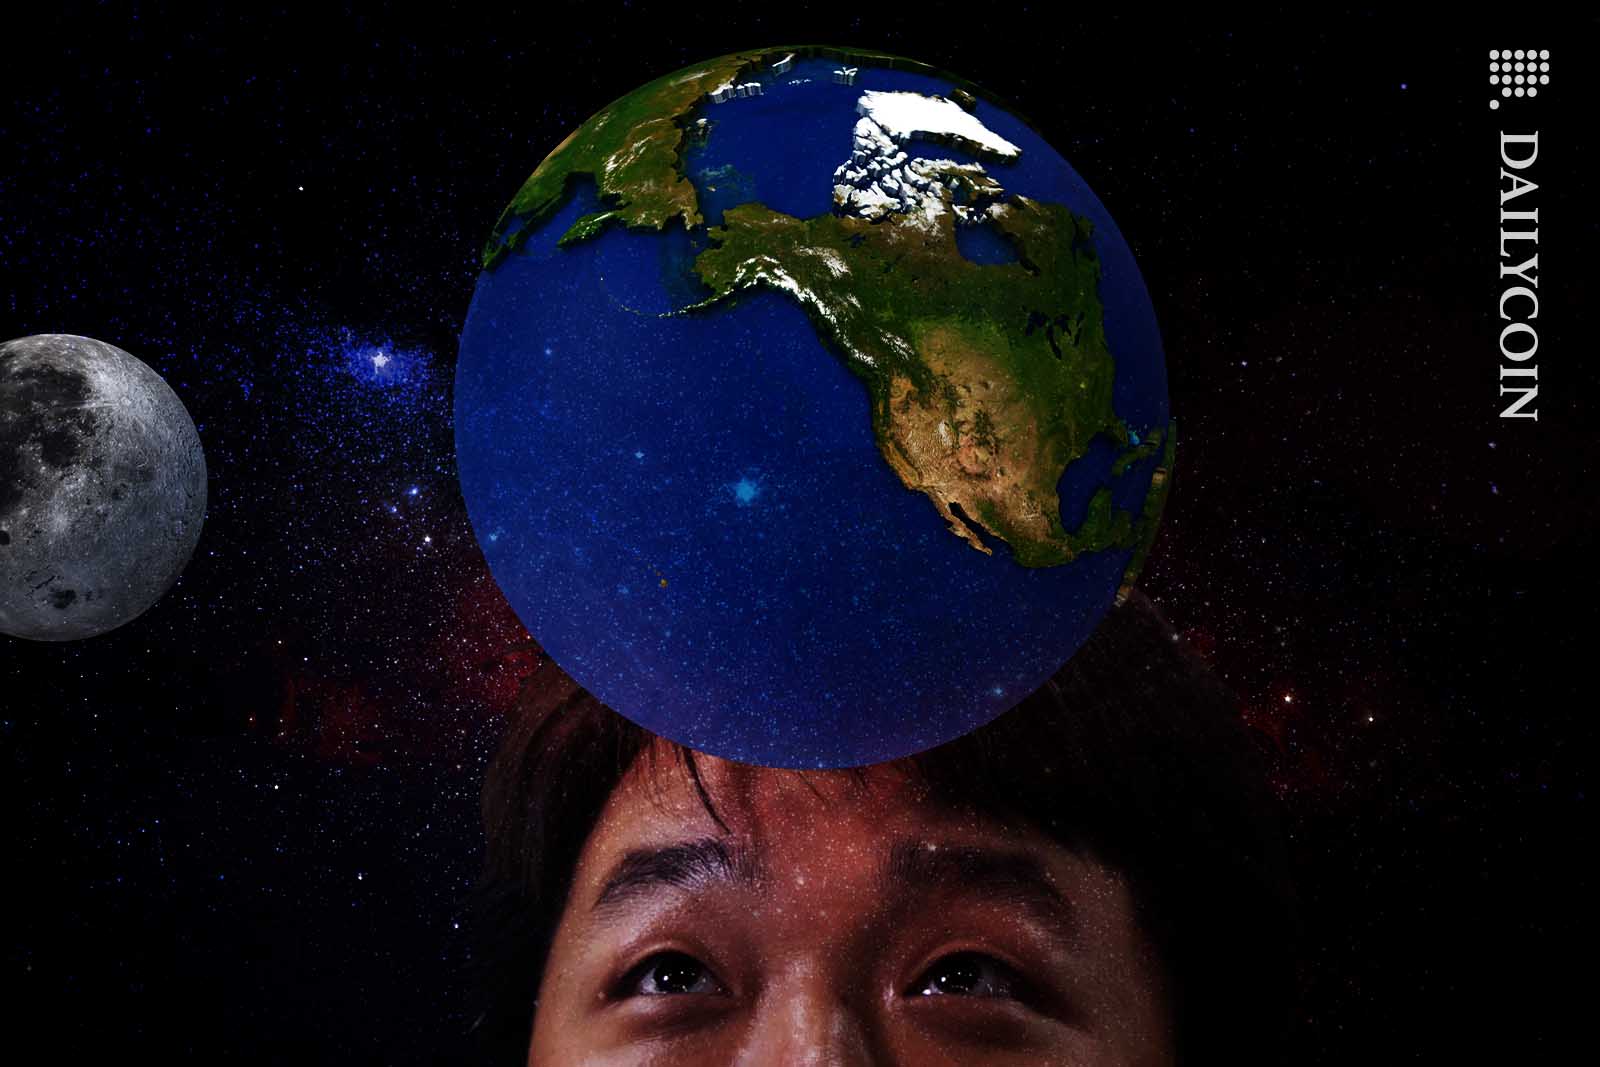 Do Kwon Staring at planet Earth in outter space.